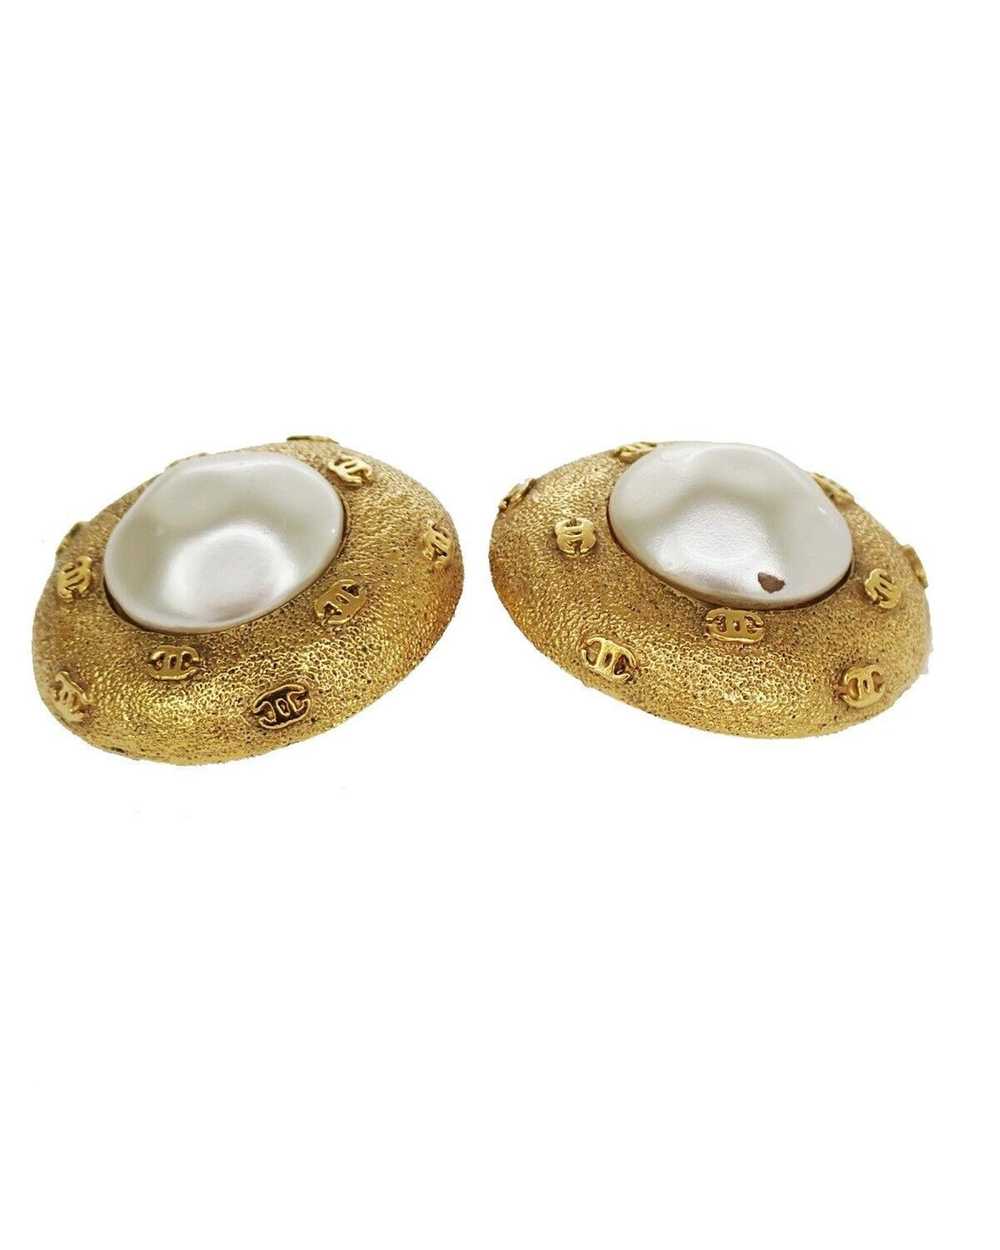 Chanel Coco Mark Button Earrings - image 3